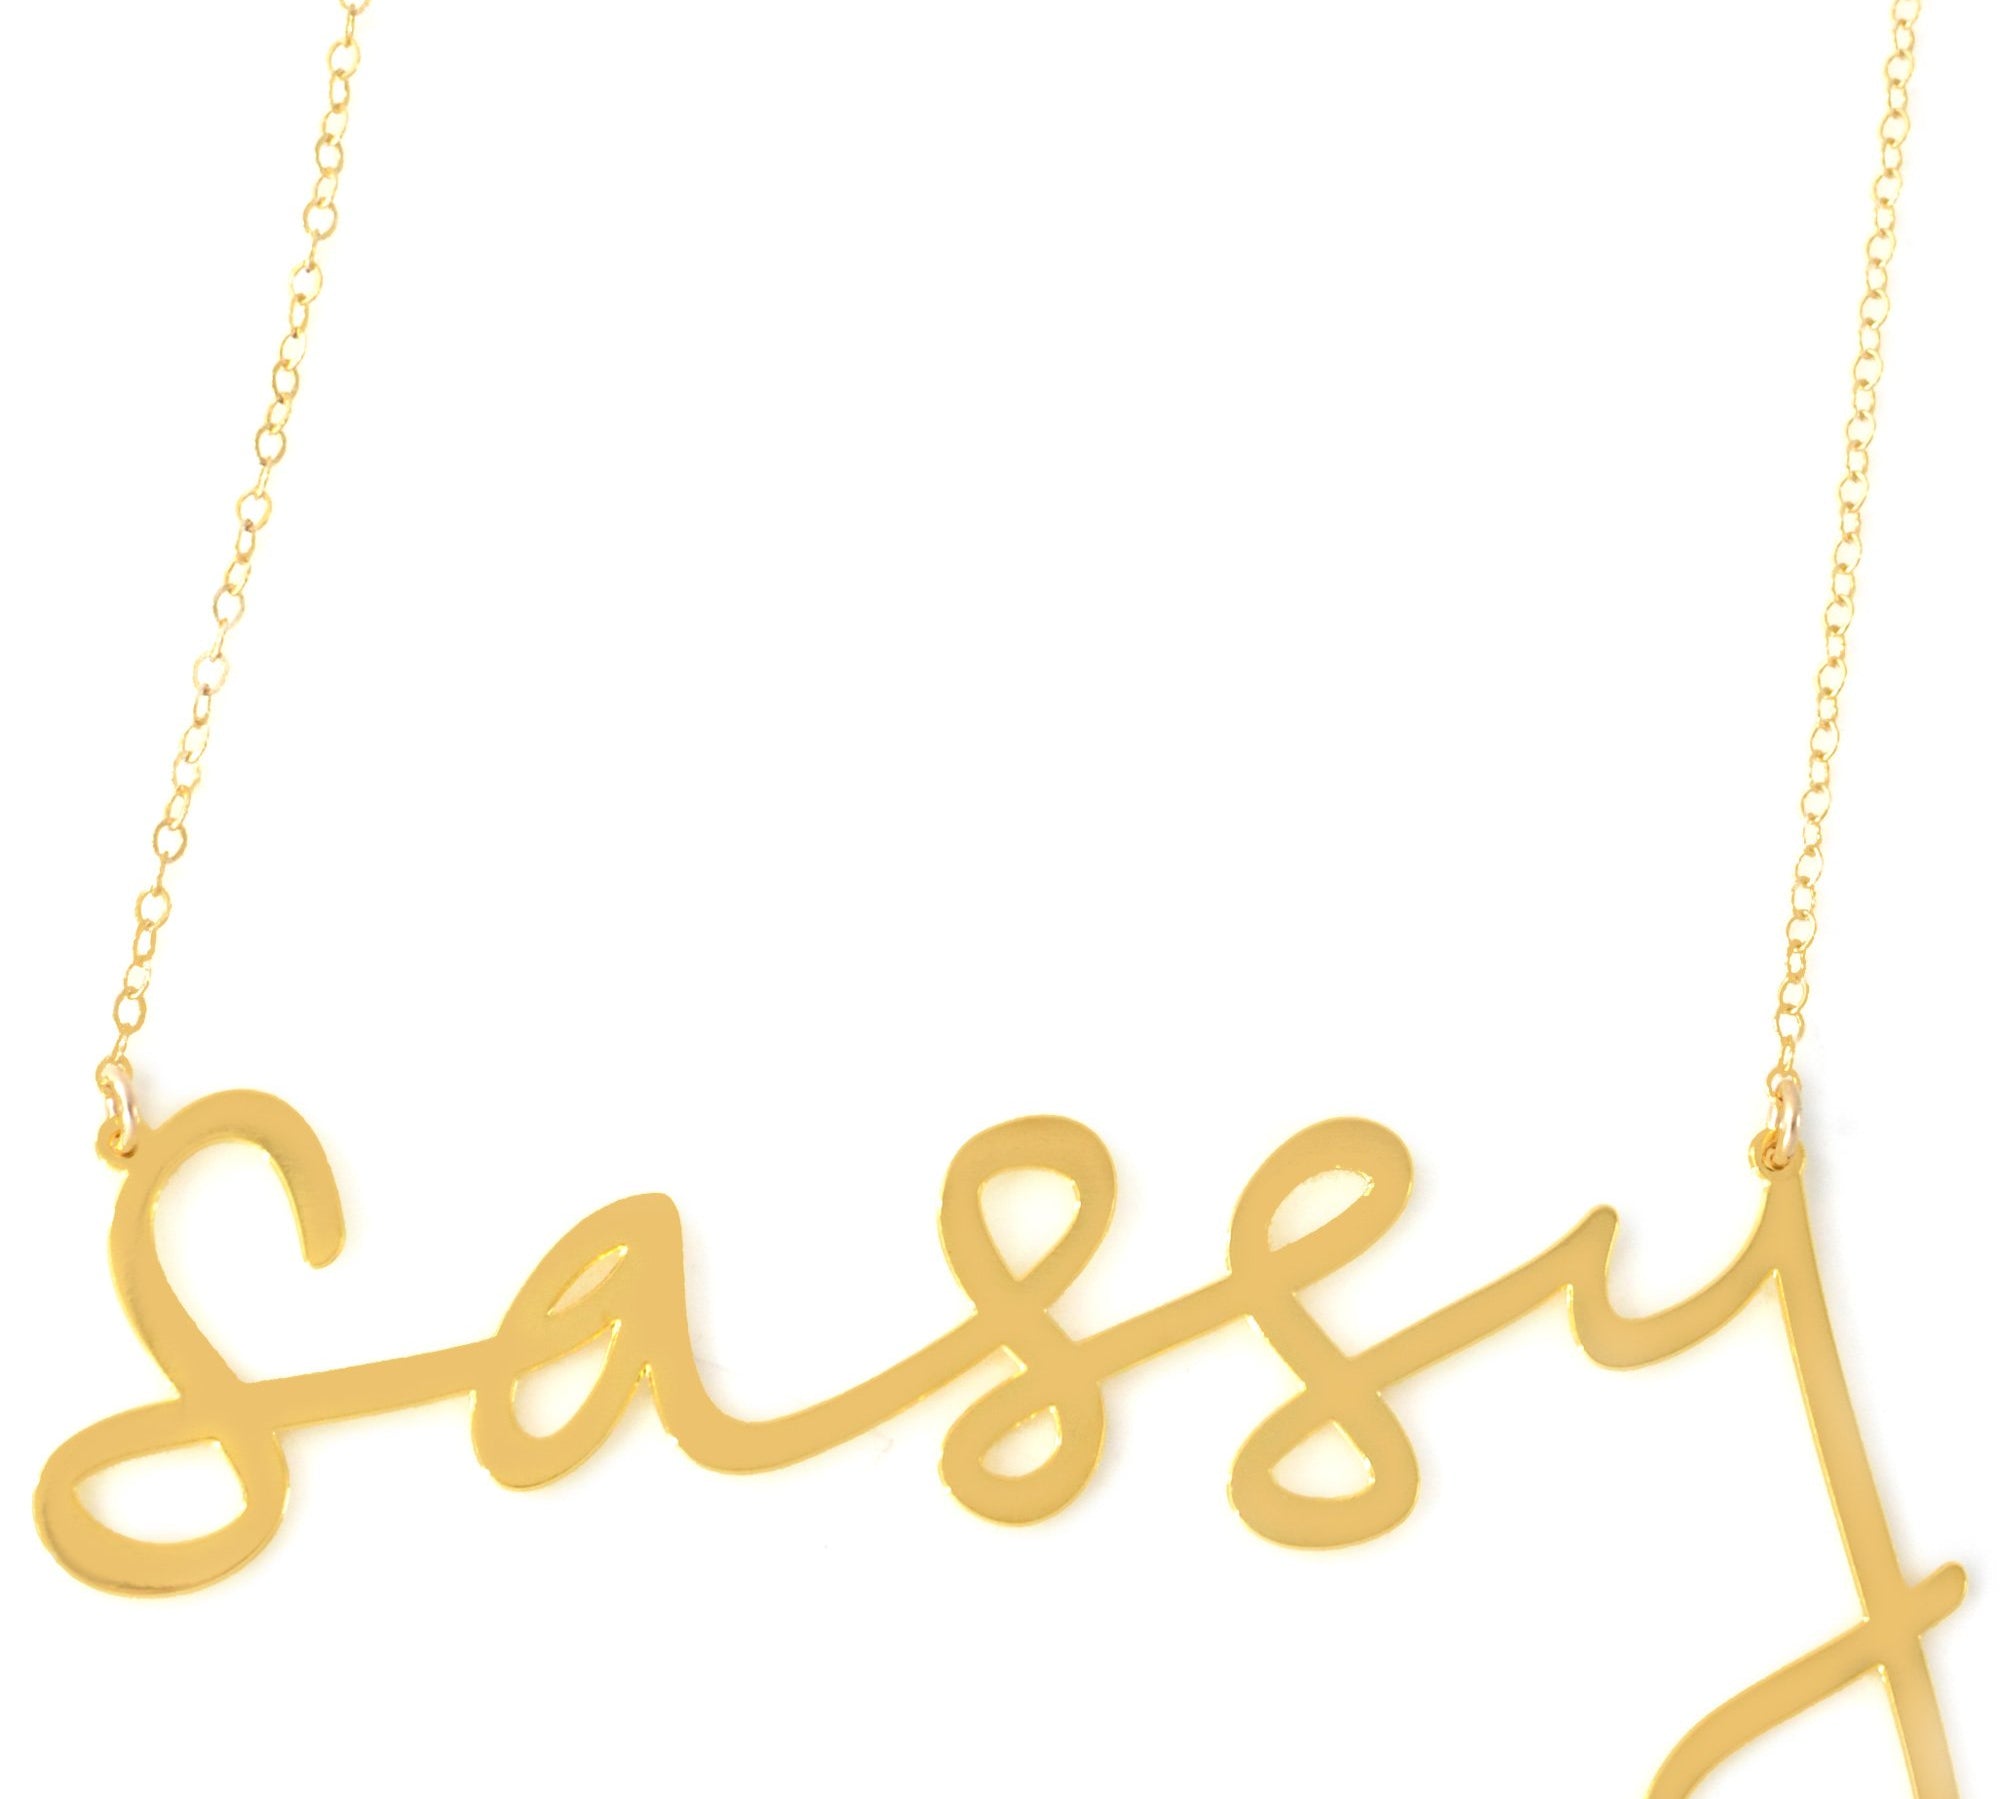 Sassy Necklace - High Quality, Affordable, Hand Written, Empowering, Self Love, Mantra Word Necklace - Available in Gold and Silver - Small and Large Sizes - Made in USA - Brevity Jewelry